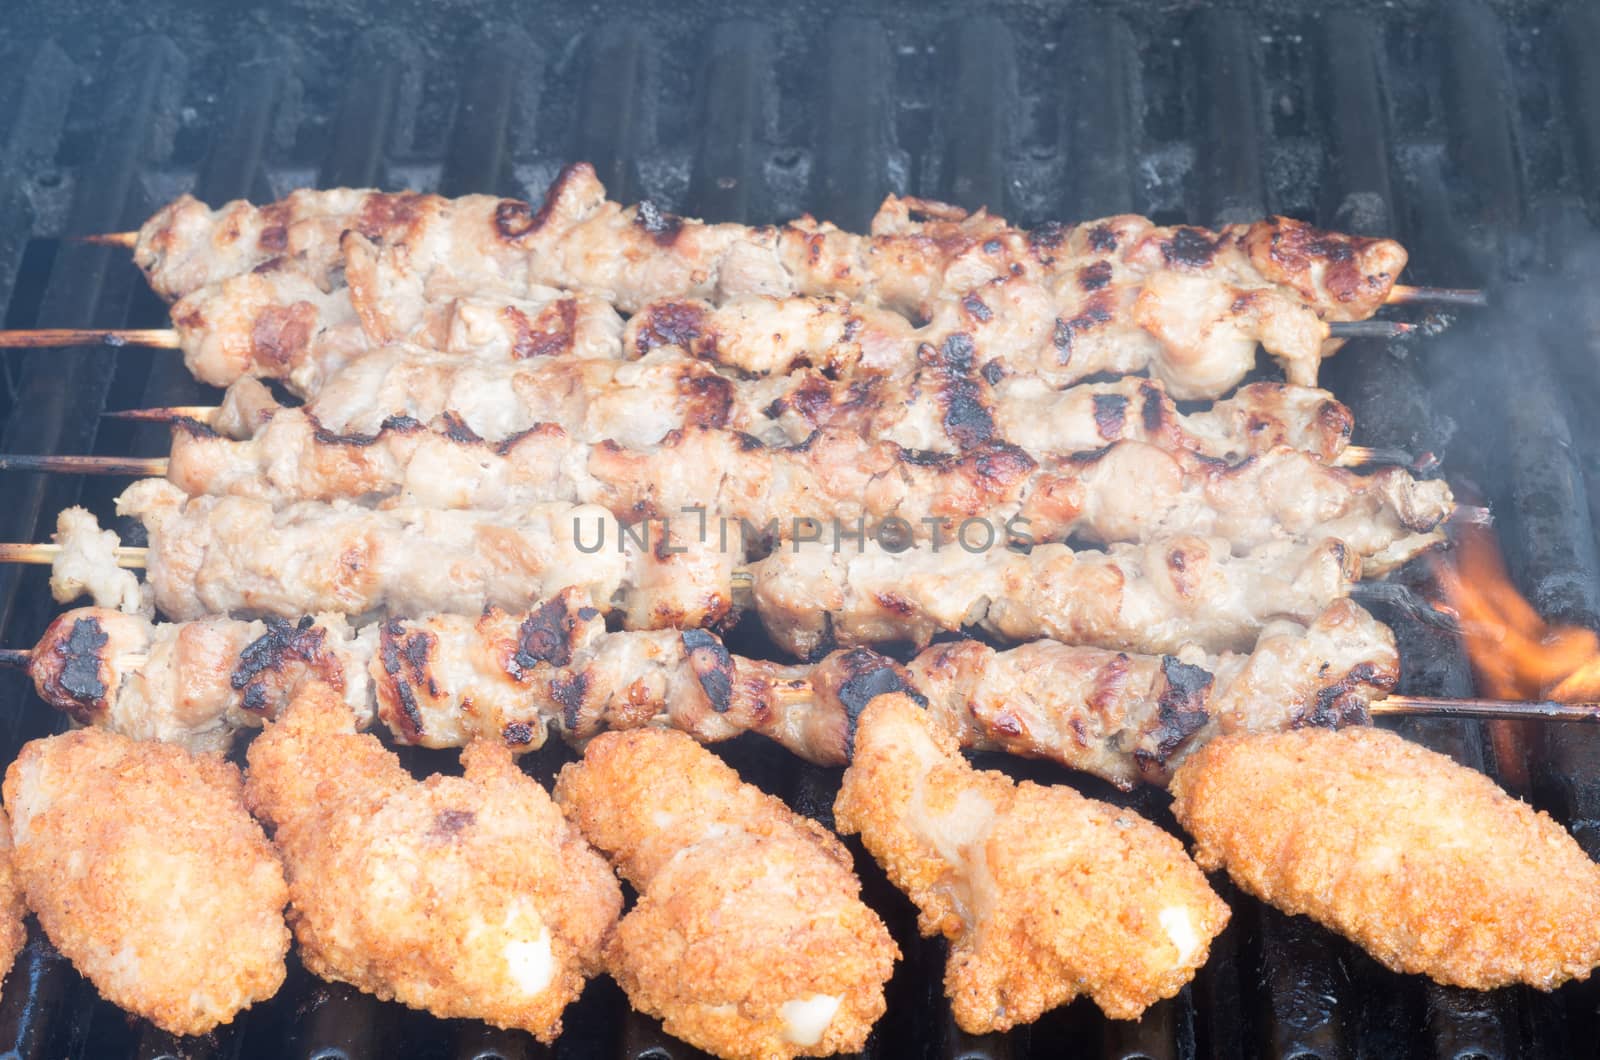 Porc skewers and chicken wings on grill